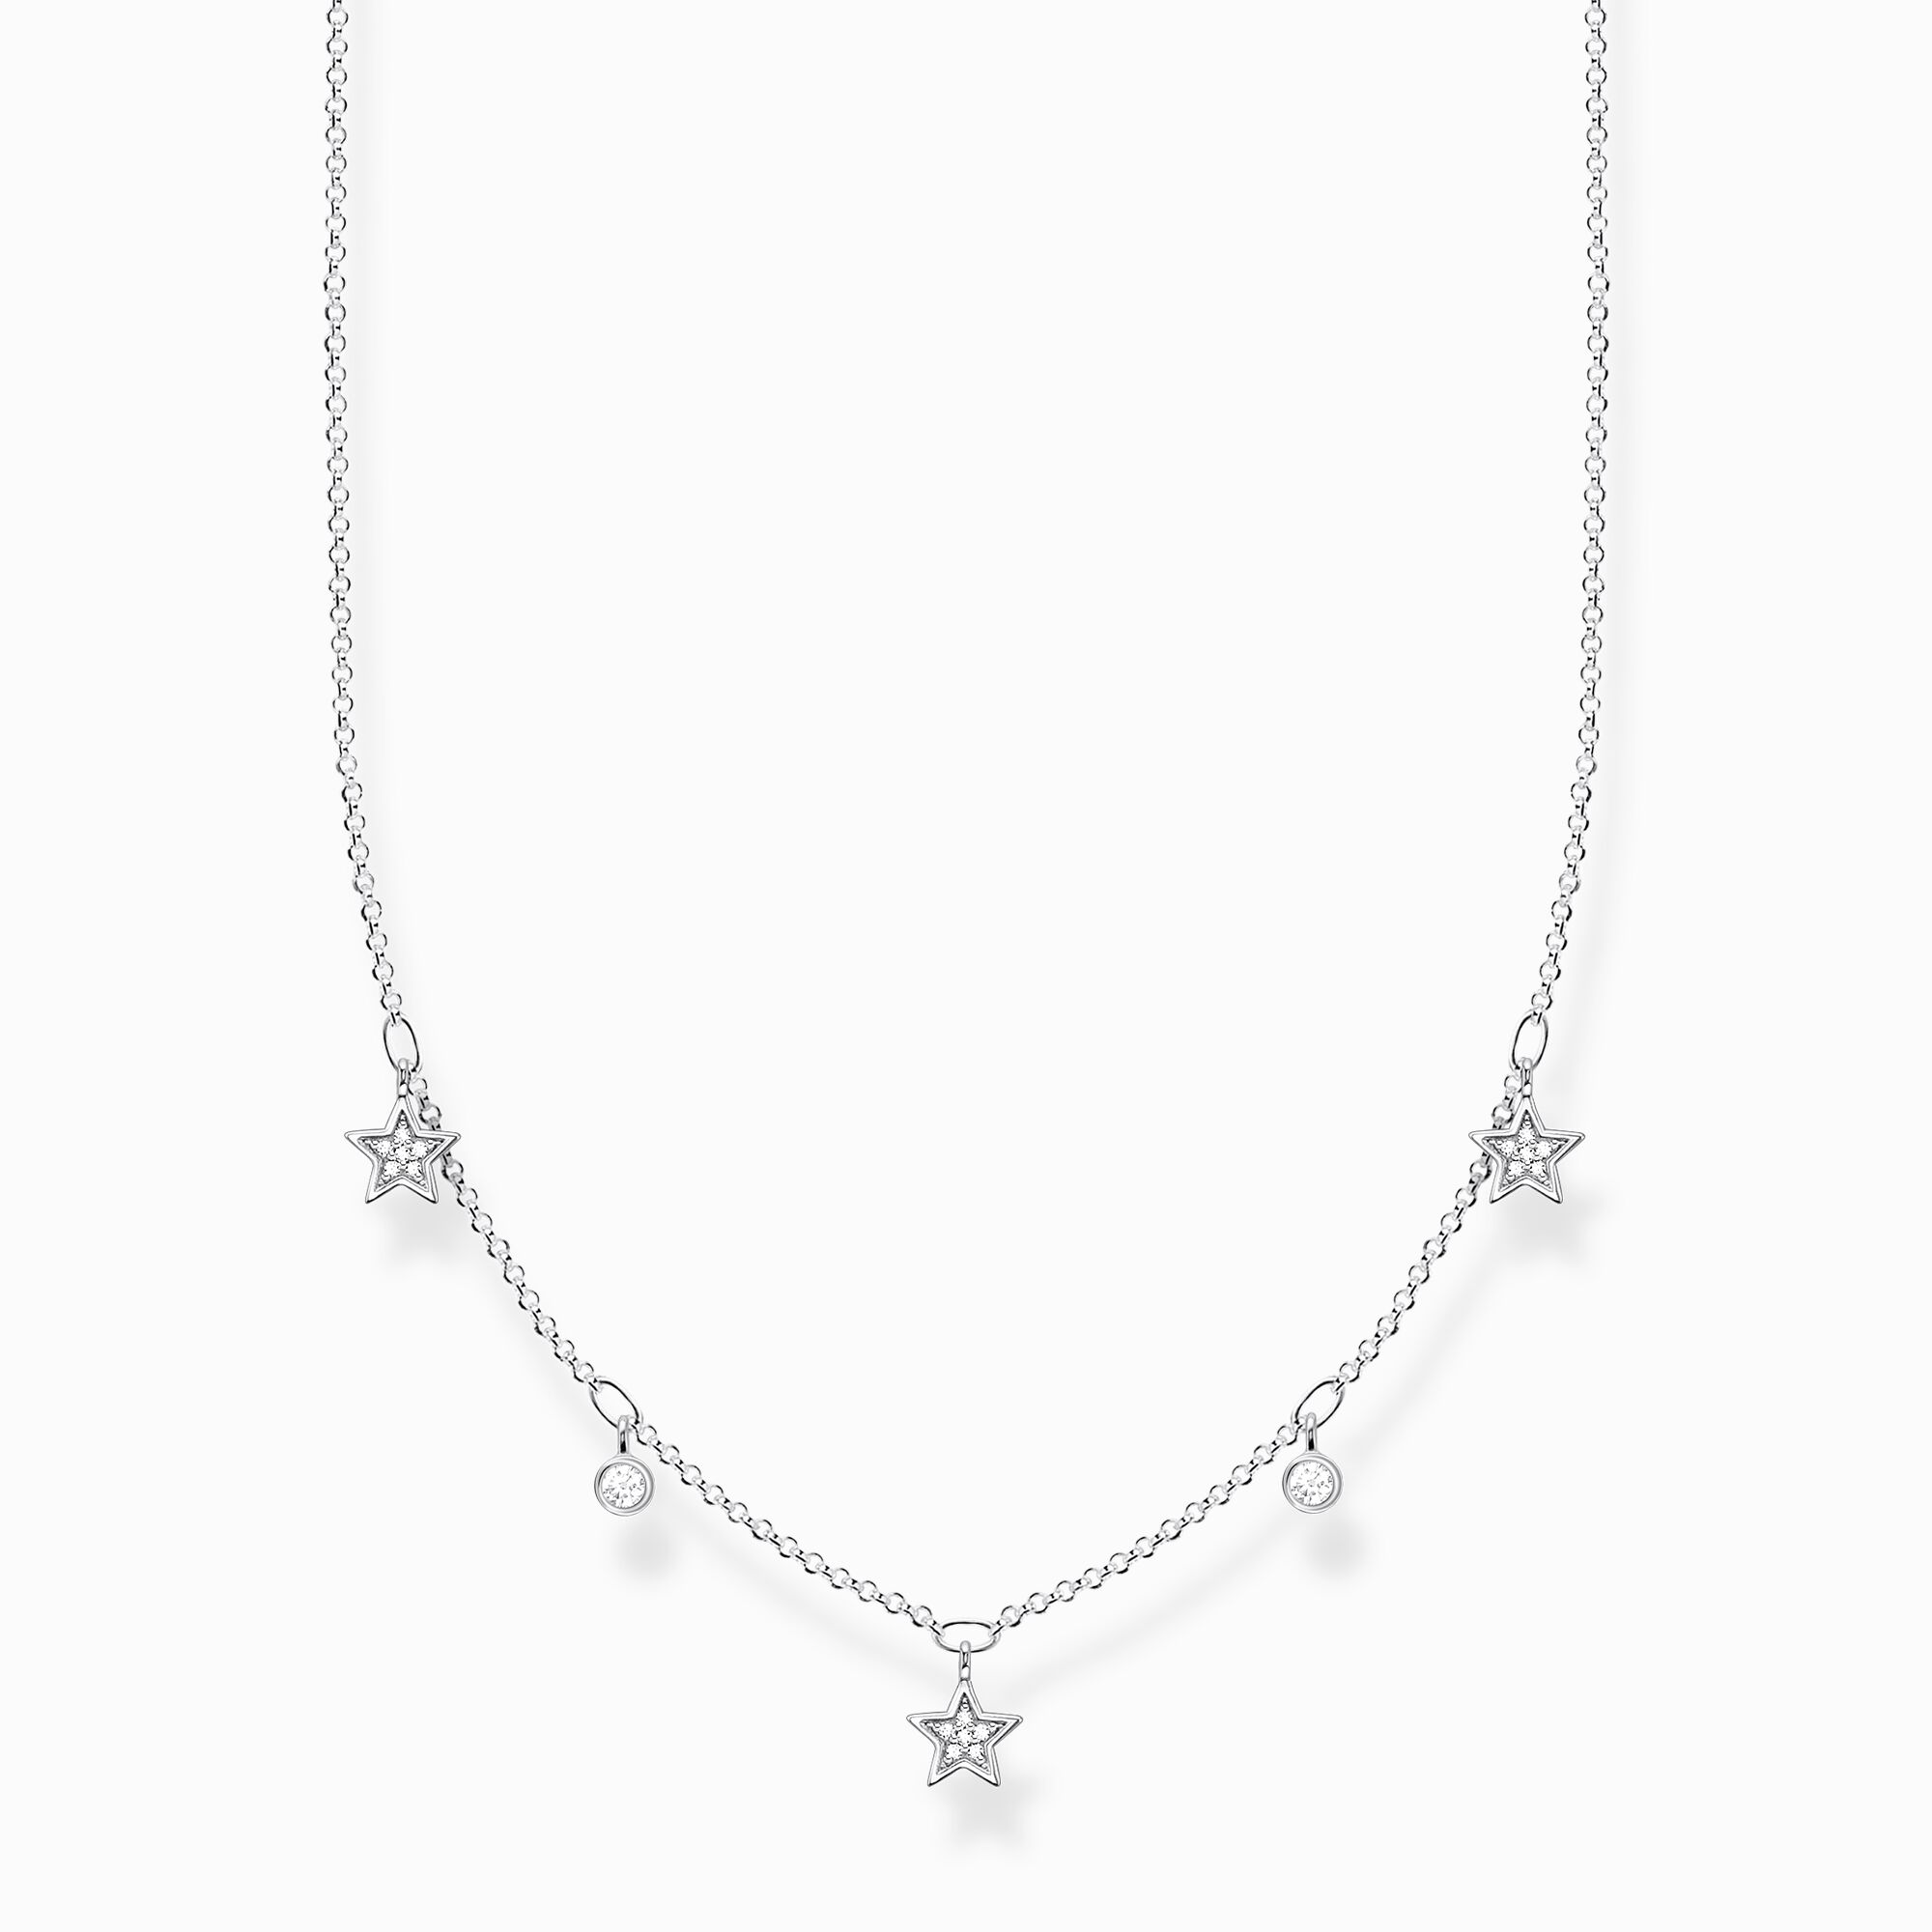 Necklace stars silver from the Charming Collection collection in the THOMAS SABO online store